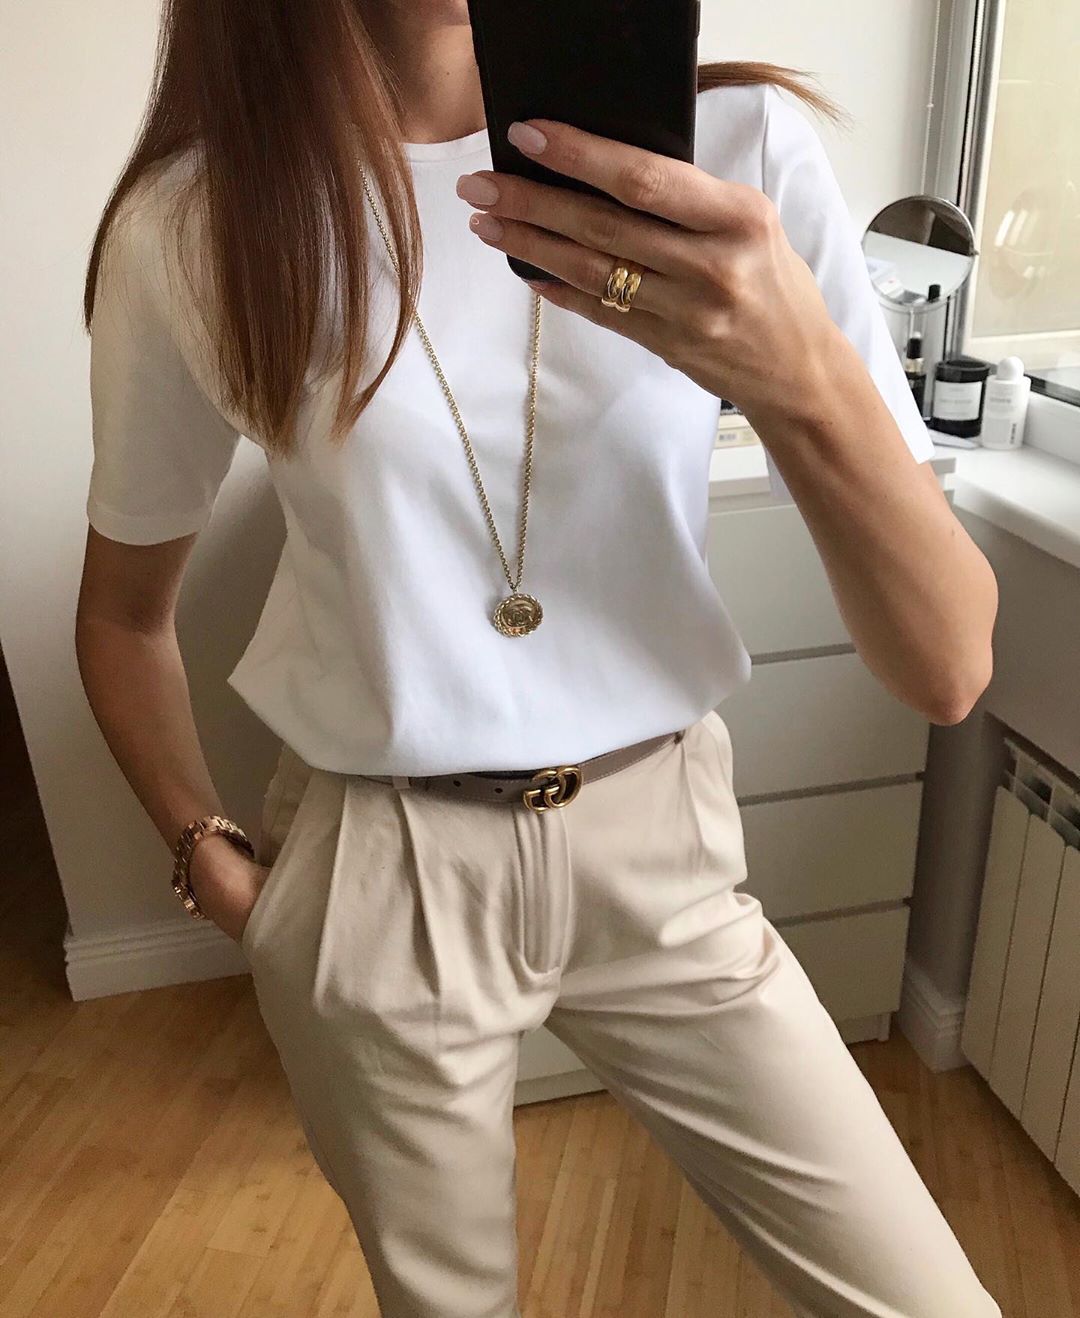 Elevated Basics Make a Chic Spring Outfit